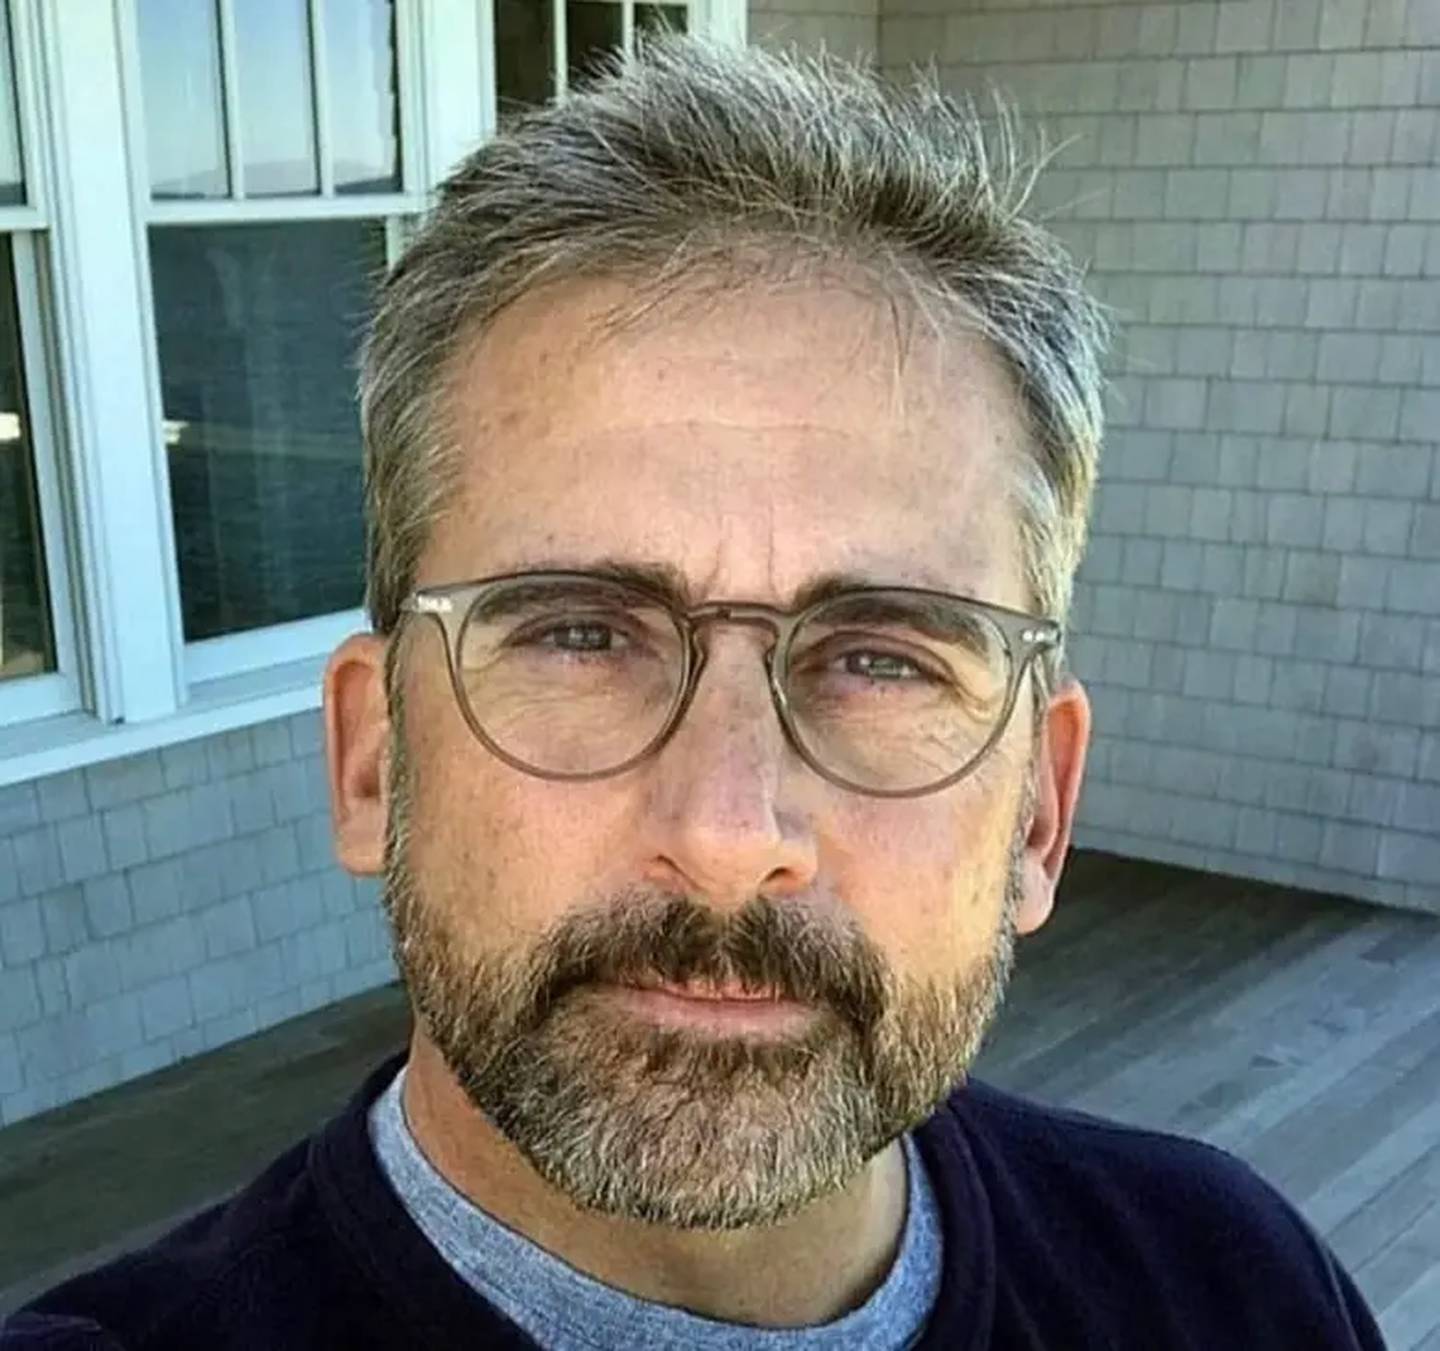 This is how Steve Carell turned 61.  The actor played beloved Michael Scott on The Office